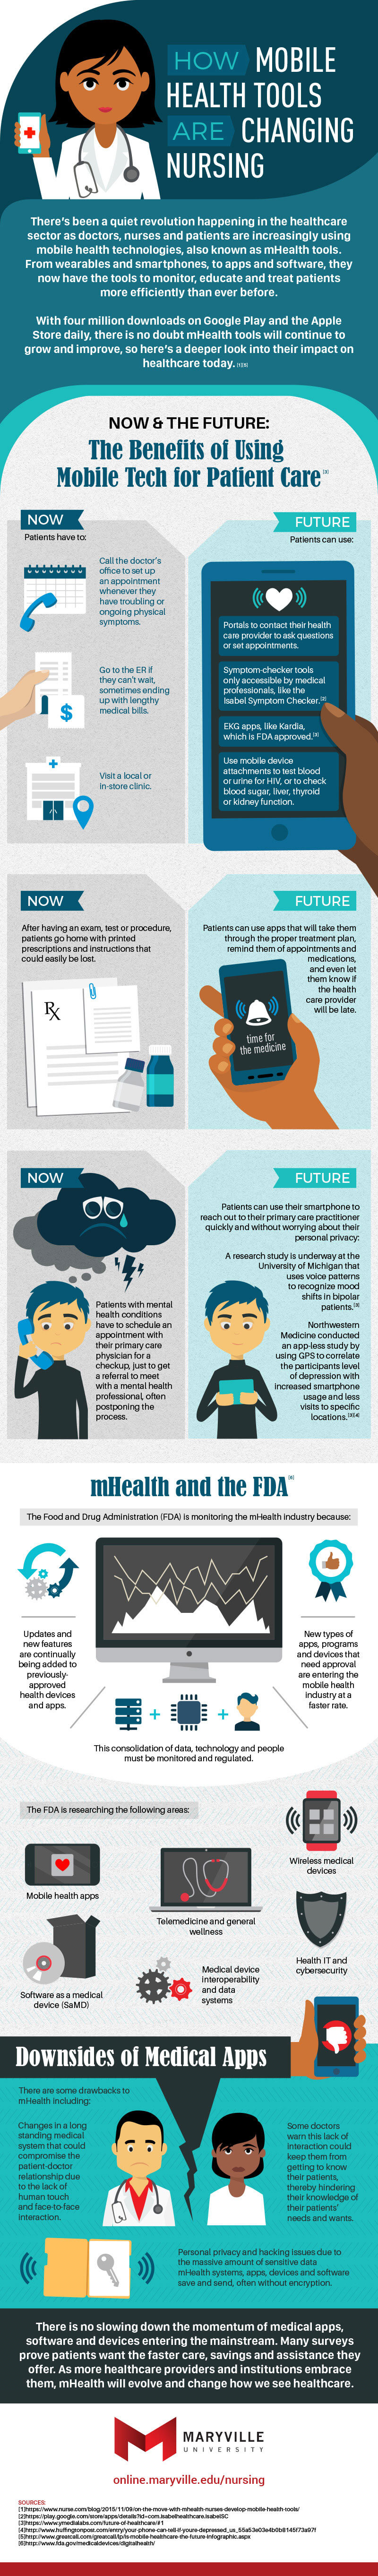 An infographic about mobile health technologies in nursing by Maryville University Online.